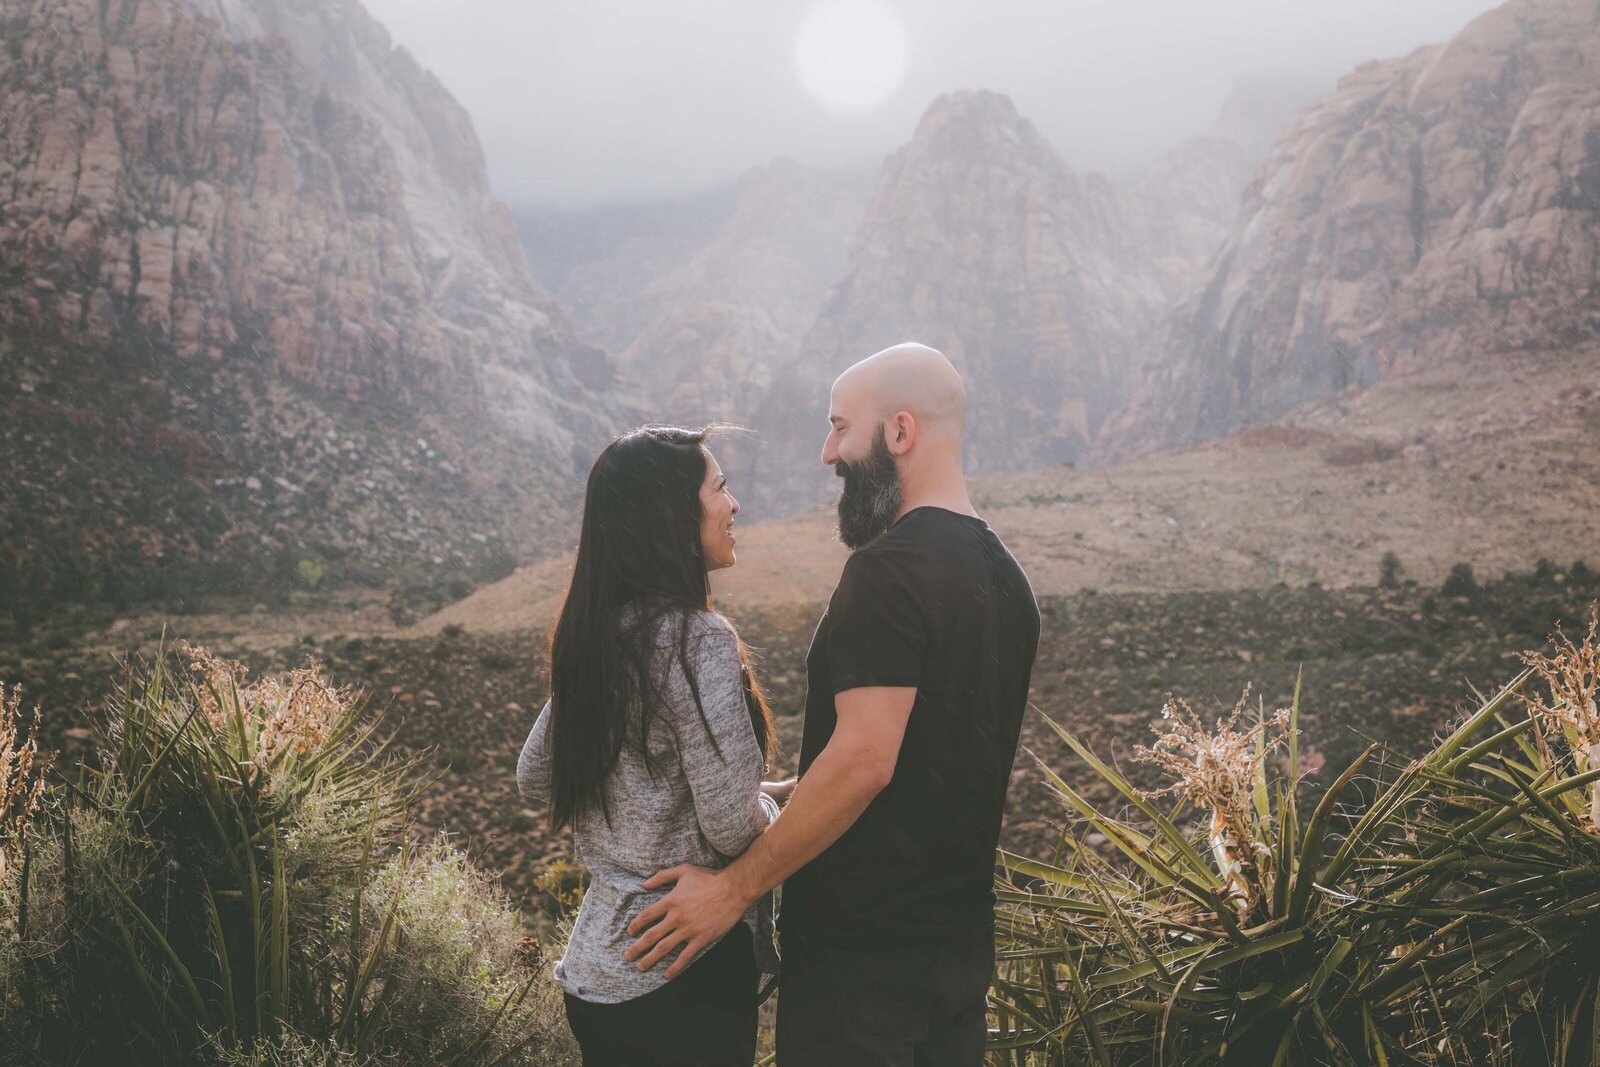 Couple looks at each other and smile among desert and mountain views.